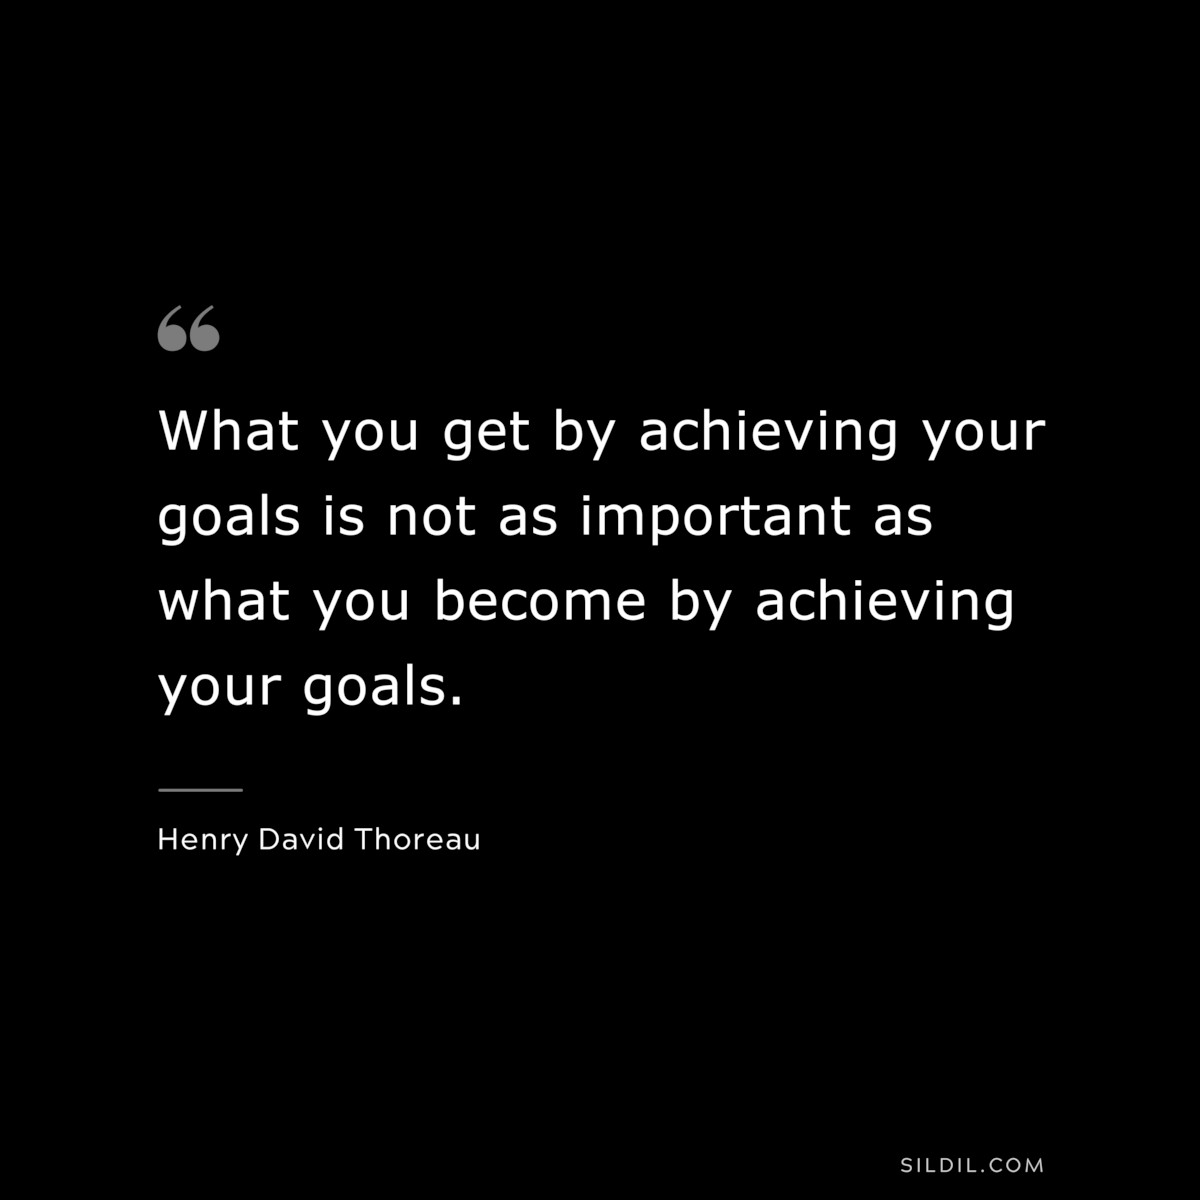 What you get by achieving your goals is not as important as what you become by achieving your goals. — Henry David Thoreau